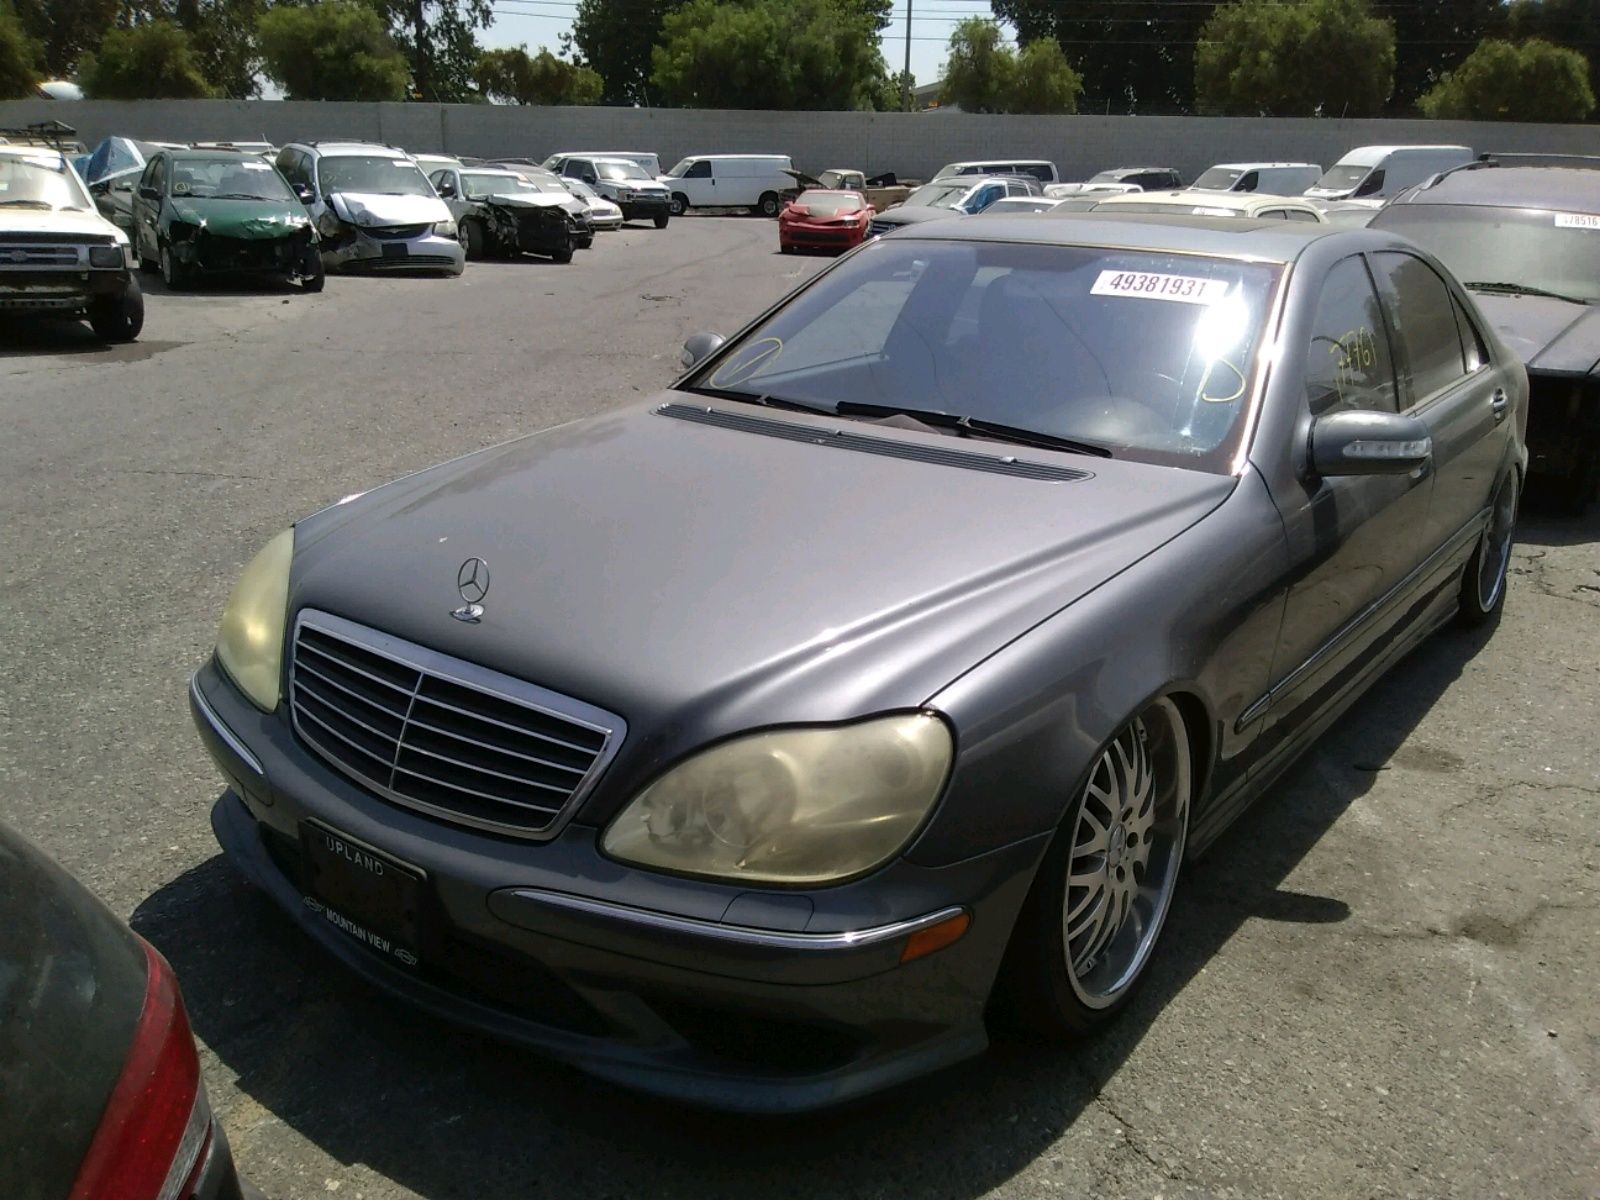 2 of WDBNG75J86A474811 Mercedes-Benz S-Class 2006